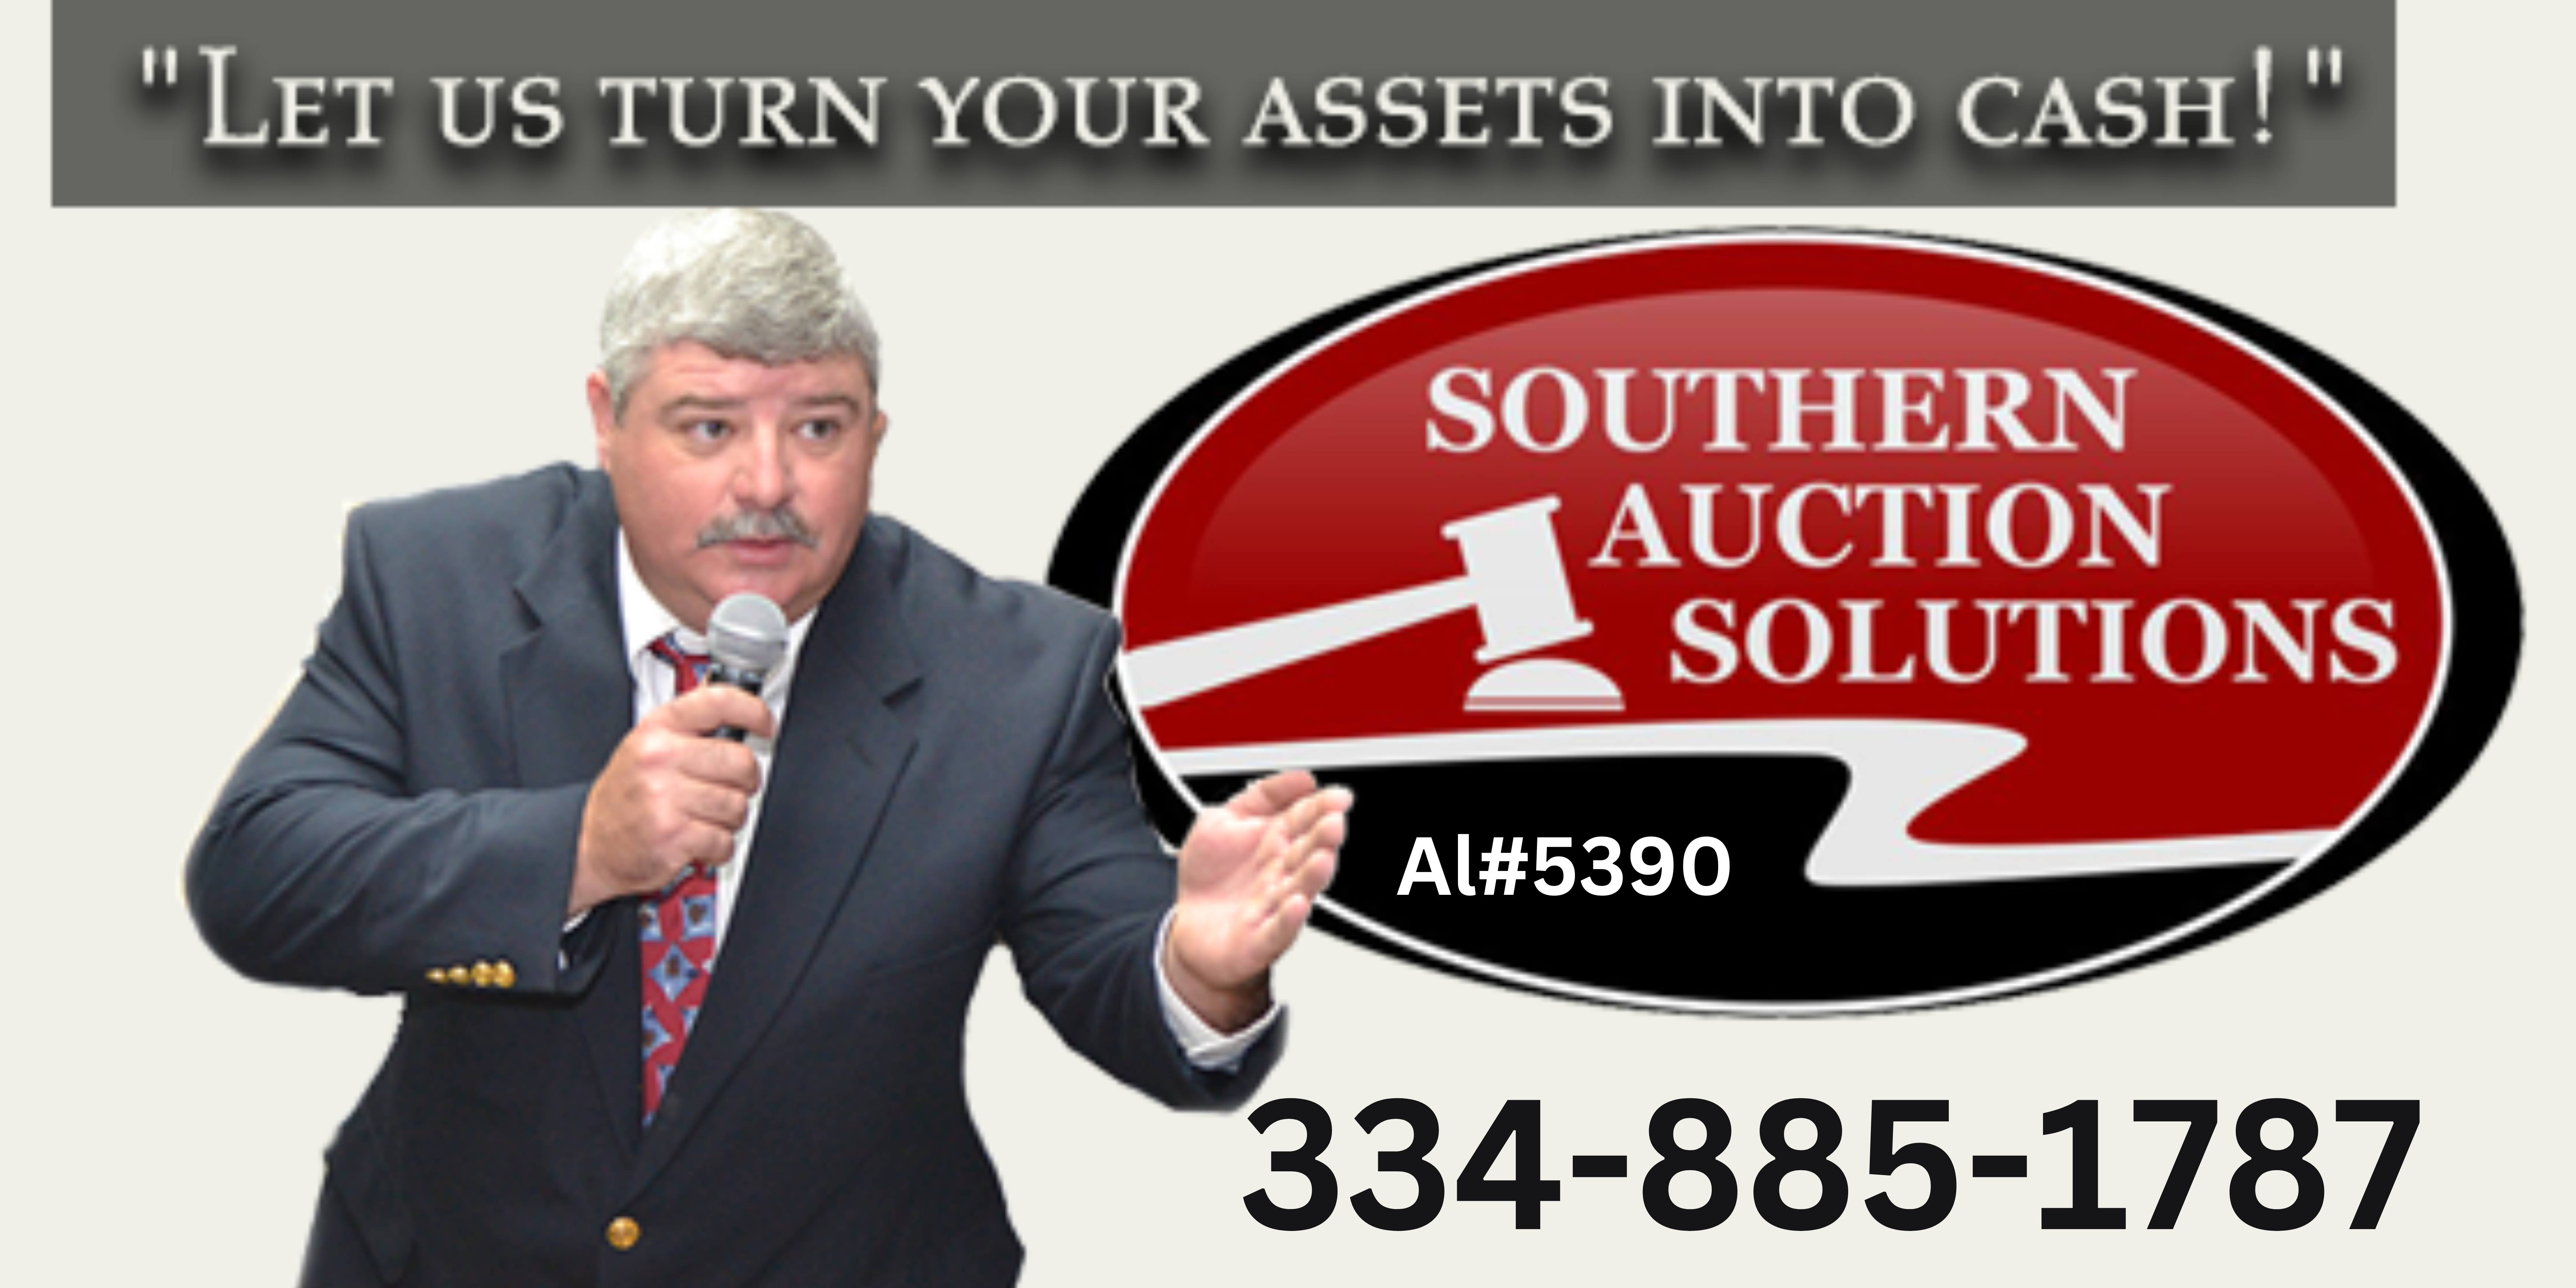 Souther Auction Solutions